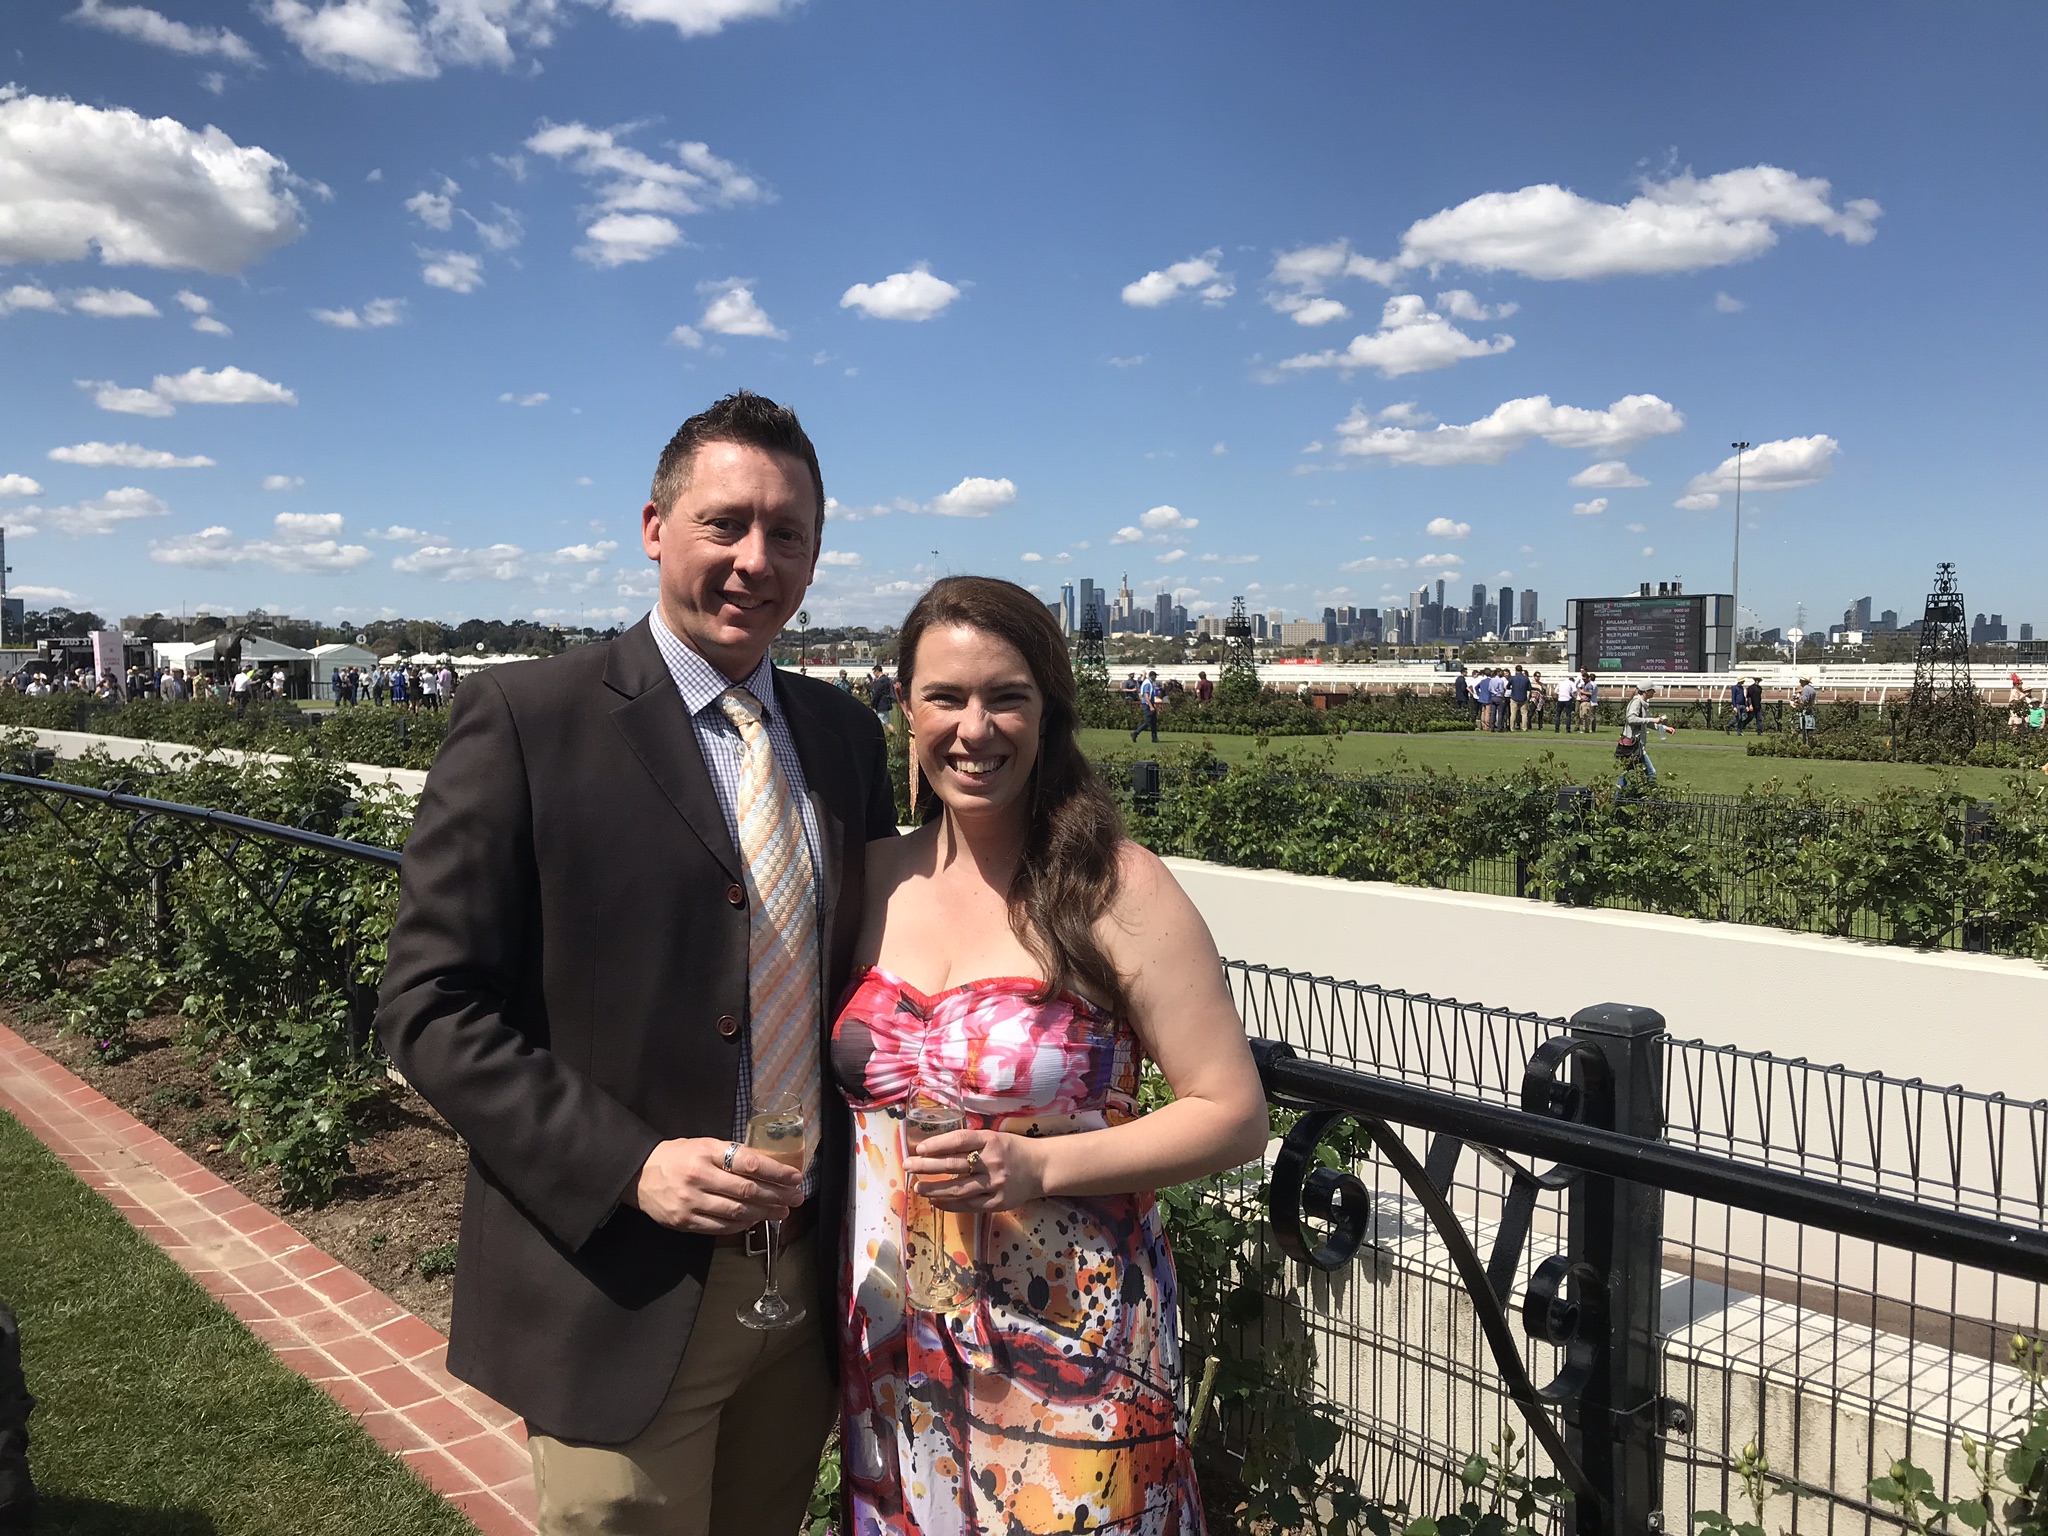 Steph and Anthony at Flemington Racecourse for Turnbull Stakes Day 2018